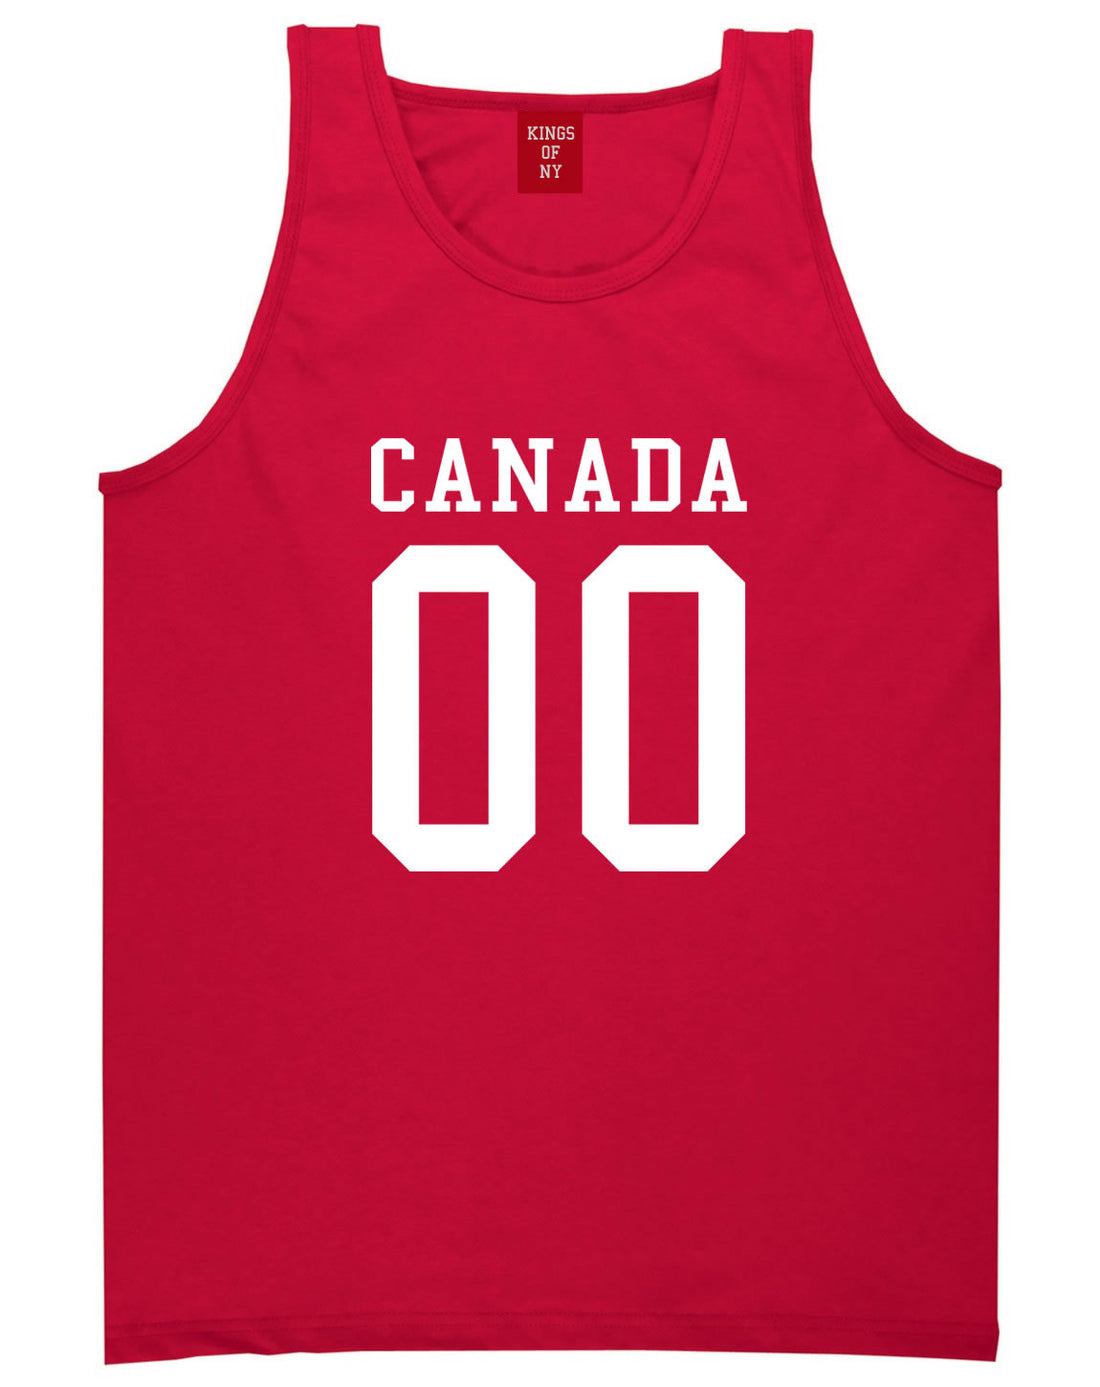 Canada Team 00 Jersey Tank Top in Red By Kings Of NY